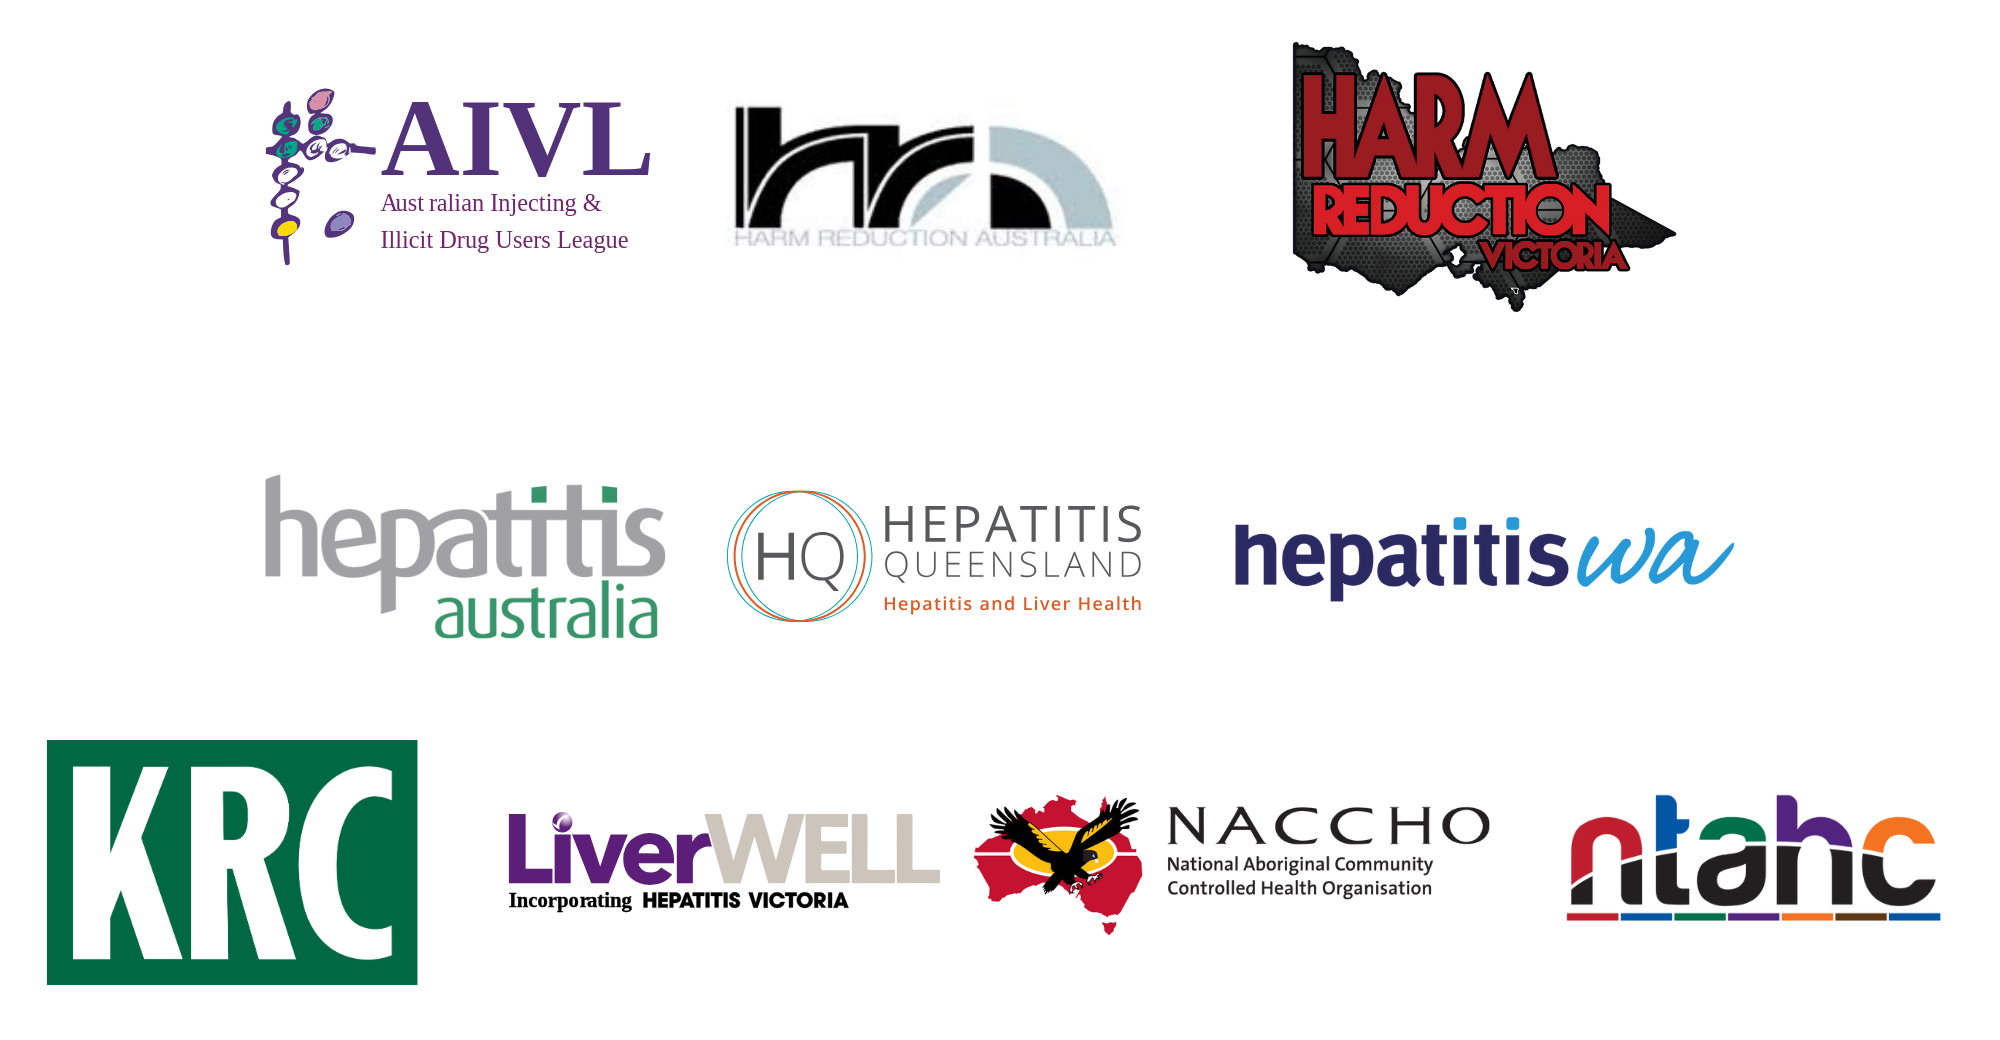 Logos for the following organisations: Australian Injecting and Illicit Drug Users League (AIVL), Harm Reduction Australia, Harm Reduction Victoria, Hepatitis Australia, Hepatitis Queensland, Hepatitis WA, Kirketon Road Centre, LiverWell, National Aboriginal Community Controlled Health Organisation (NACCHO), and Northern Territory AIDS and Hepatitis Council (NTAHC).